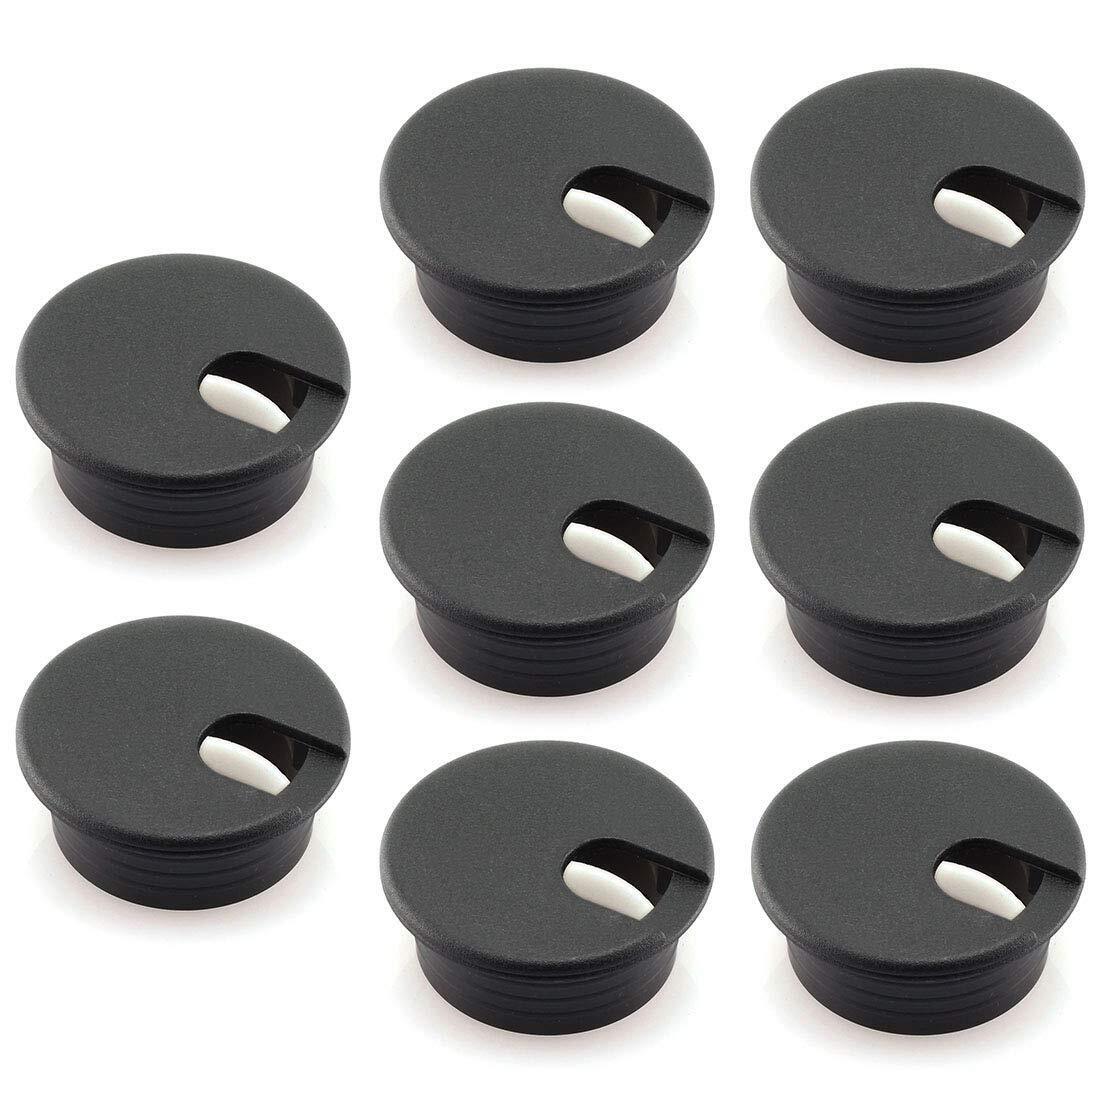 8pcs 1-1/2 inch Desk Wire Cord Cable Grommets Hole Cover for Office PC Desk C...